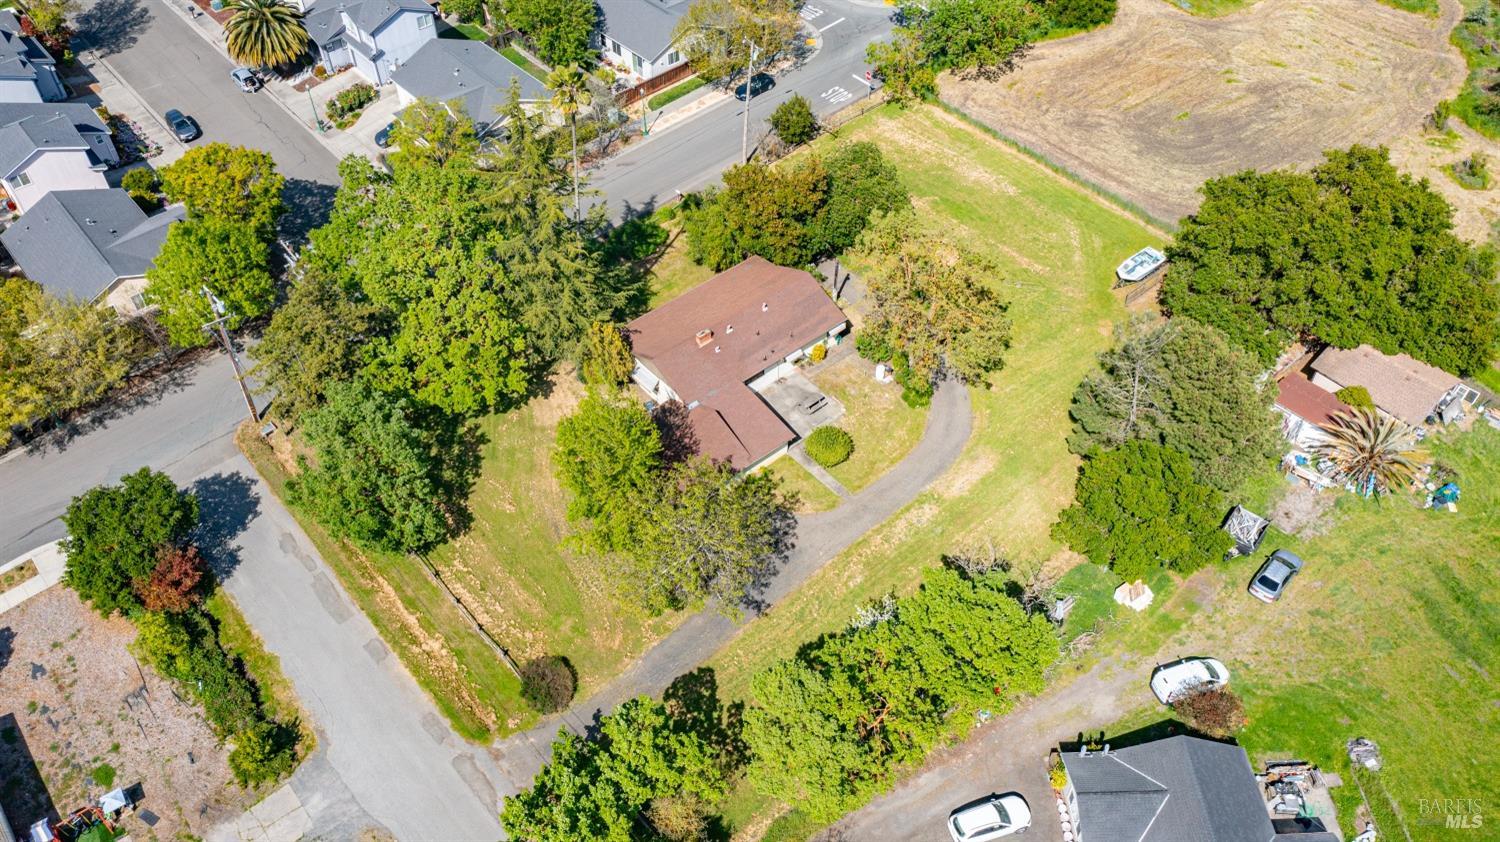 an aerial view of residential house with swimming pool and lawn chairs